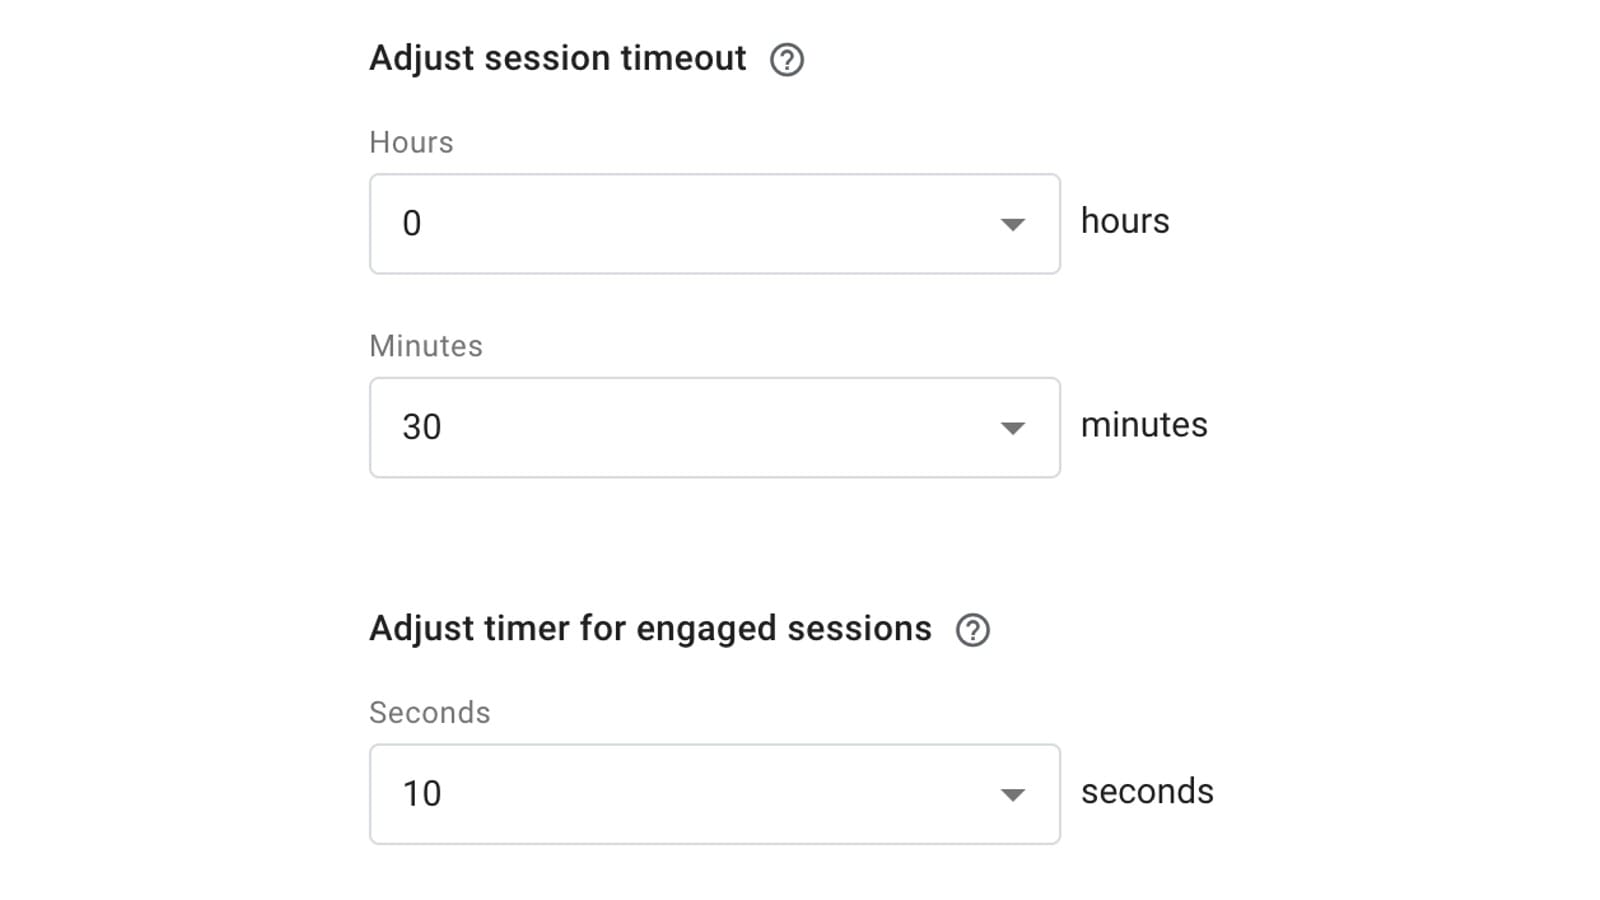 Session Timeouts and Engaged Sessions in GA4